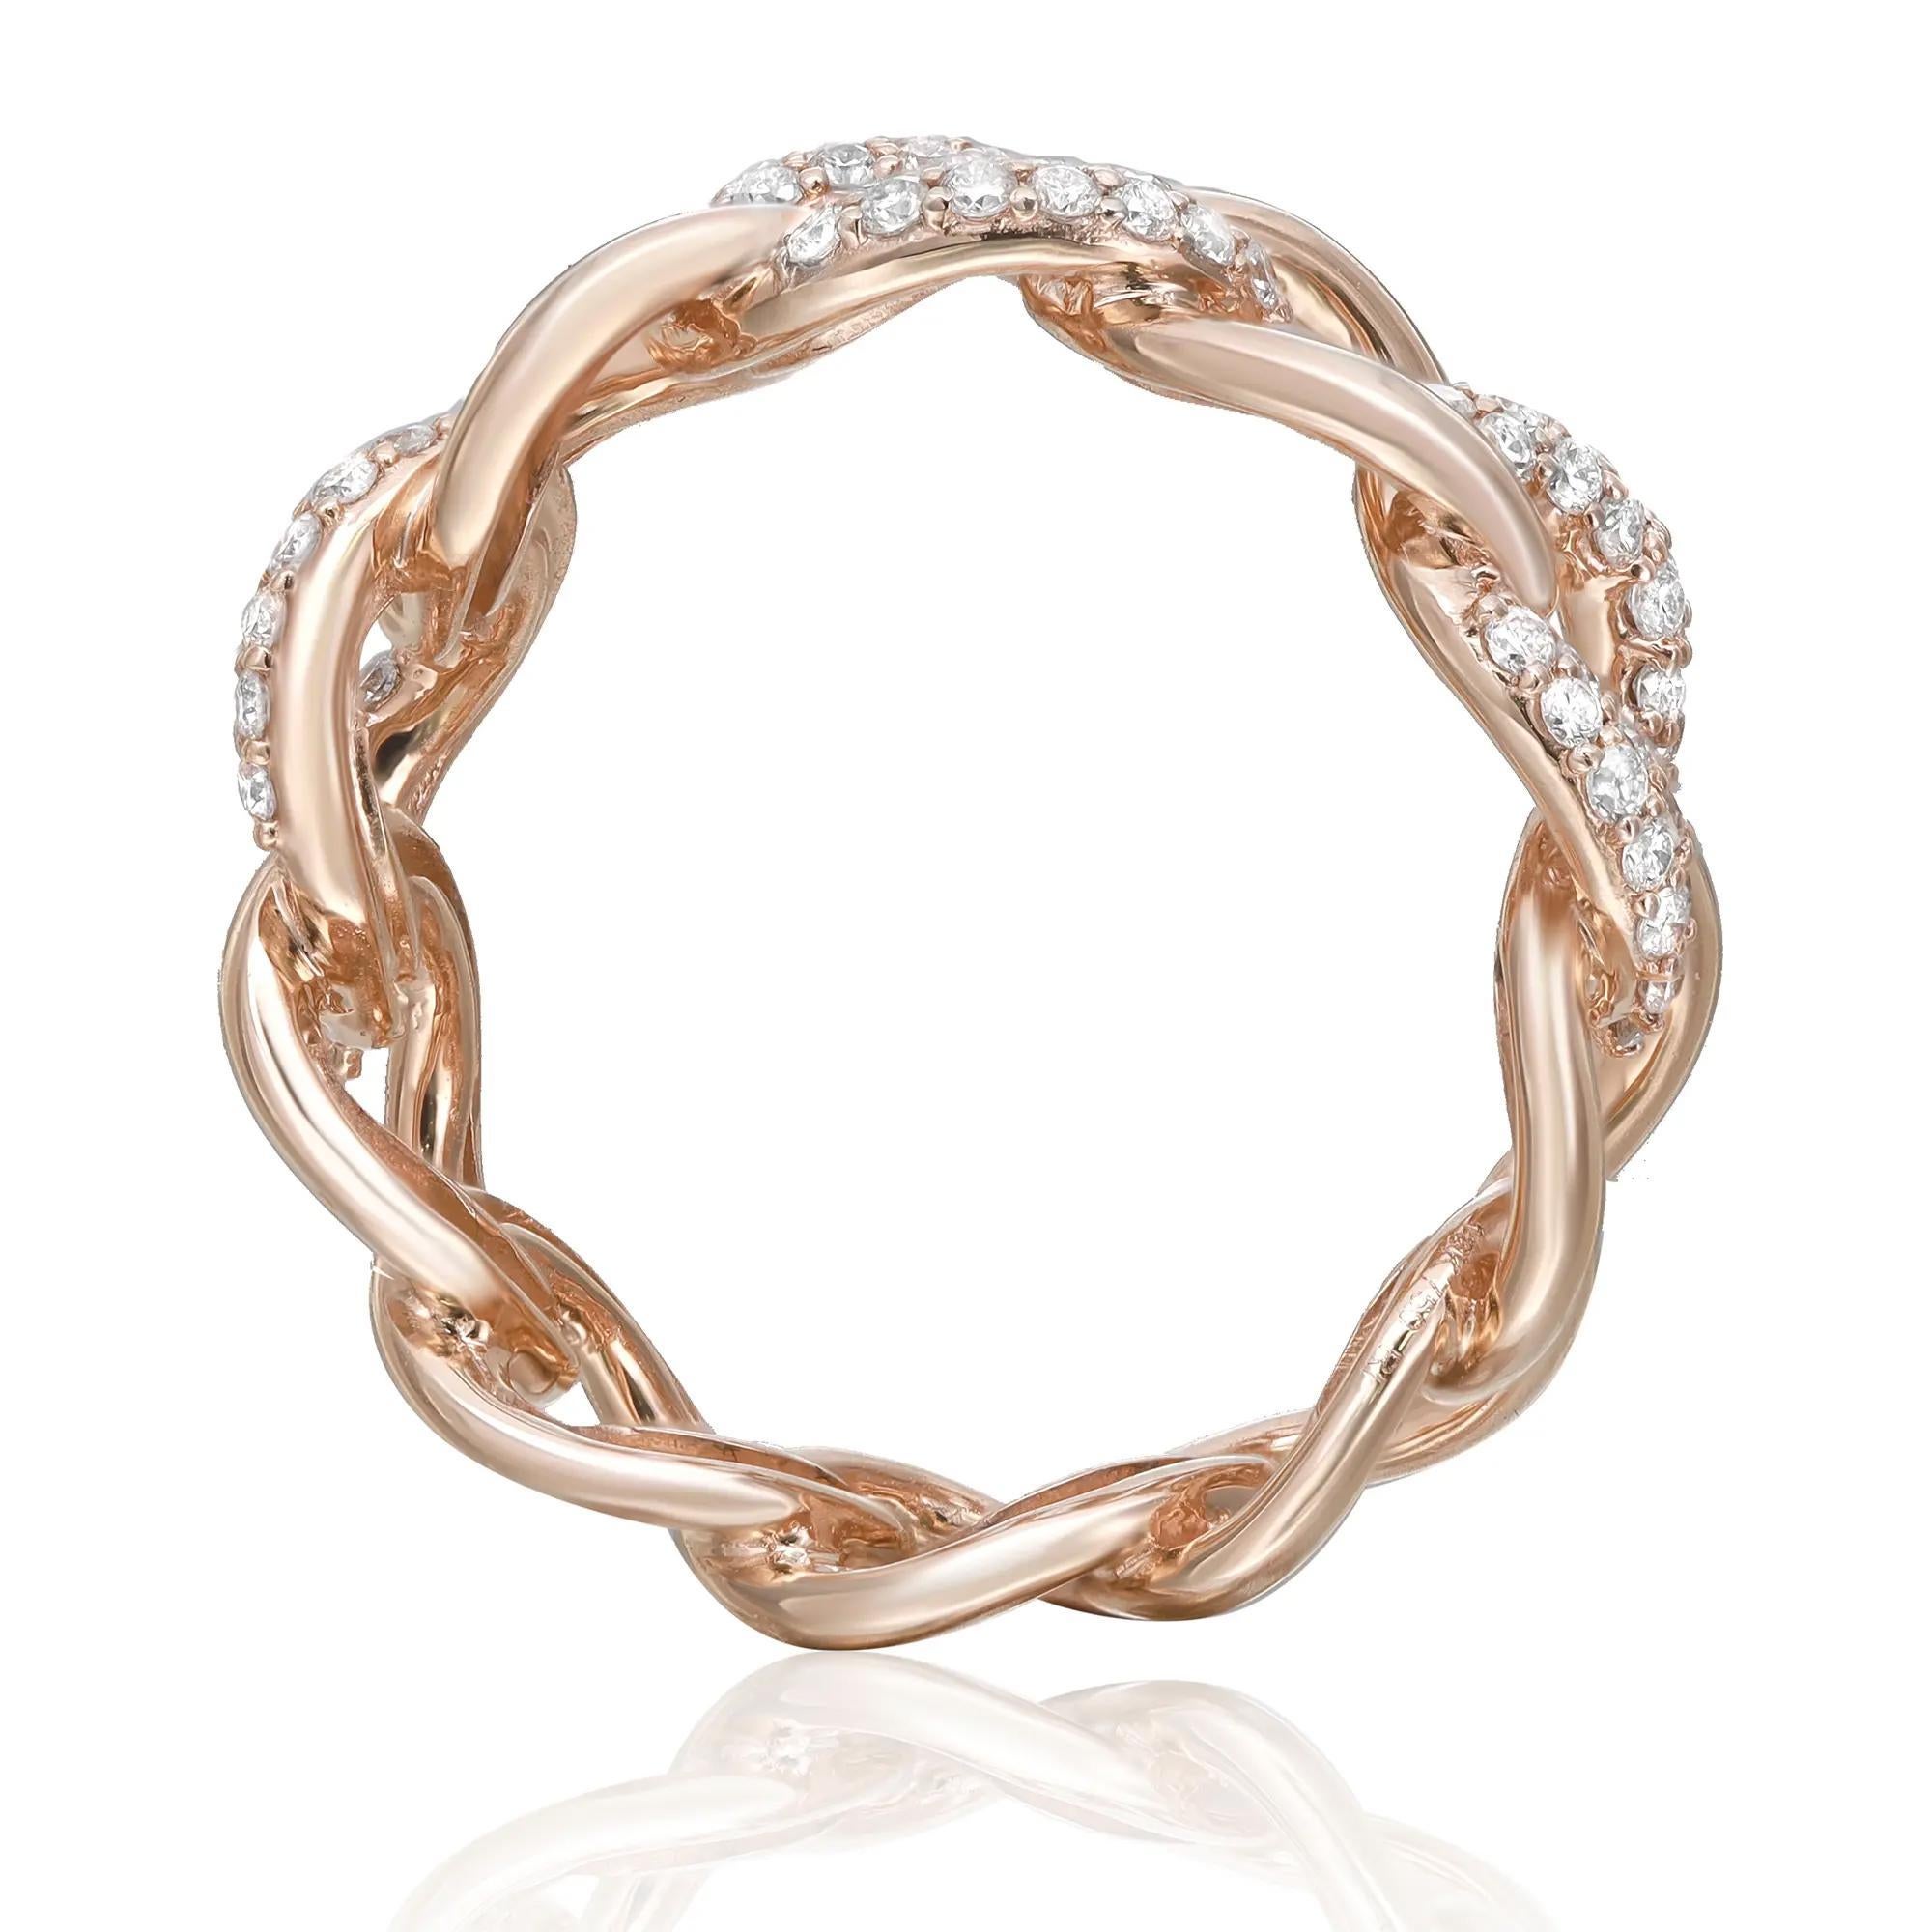 This classic yet elegant chain link ring band features pave set round brilliant cut diamonds encrusted in three alternate links. Crafted in high polished 18k rose gold. Total diamond weight: 0.57Cttw. Diamond quality: Color G-H and Clarity VS-SI.